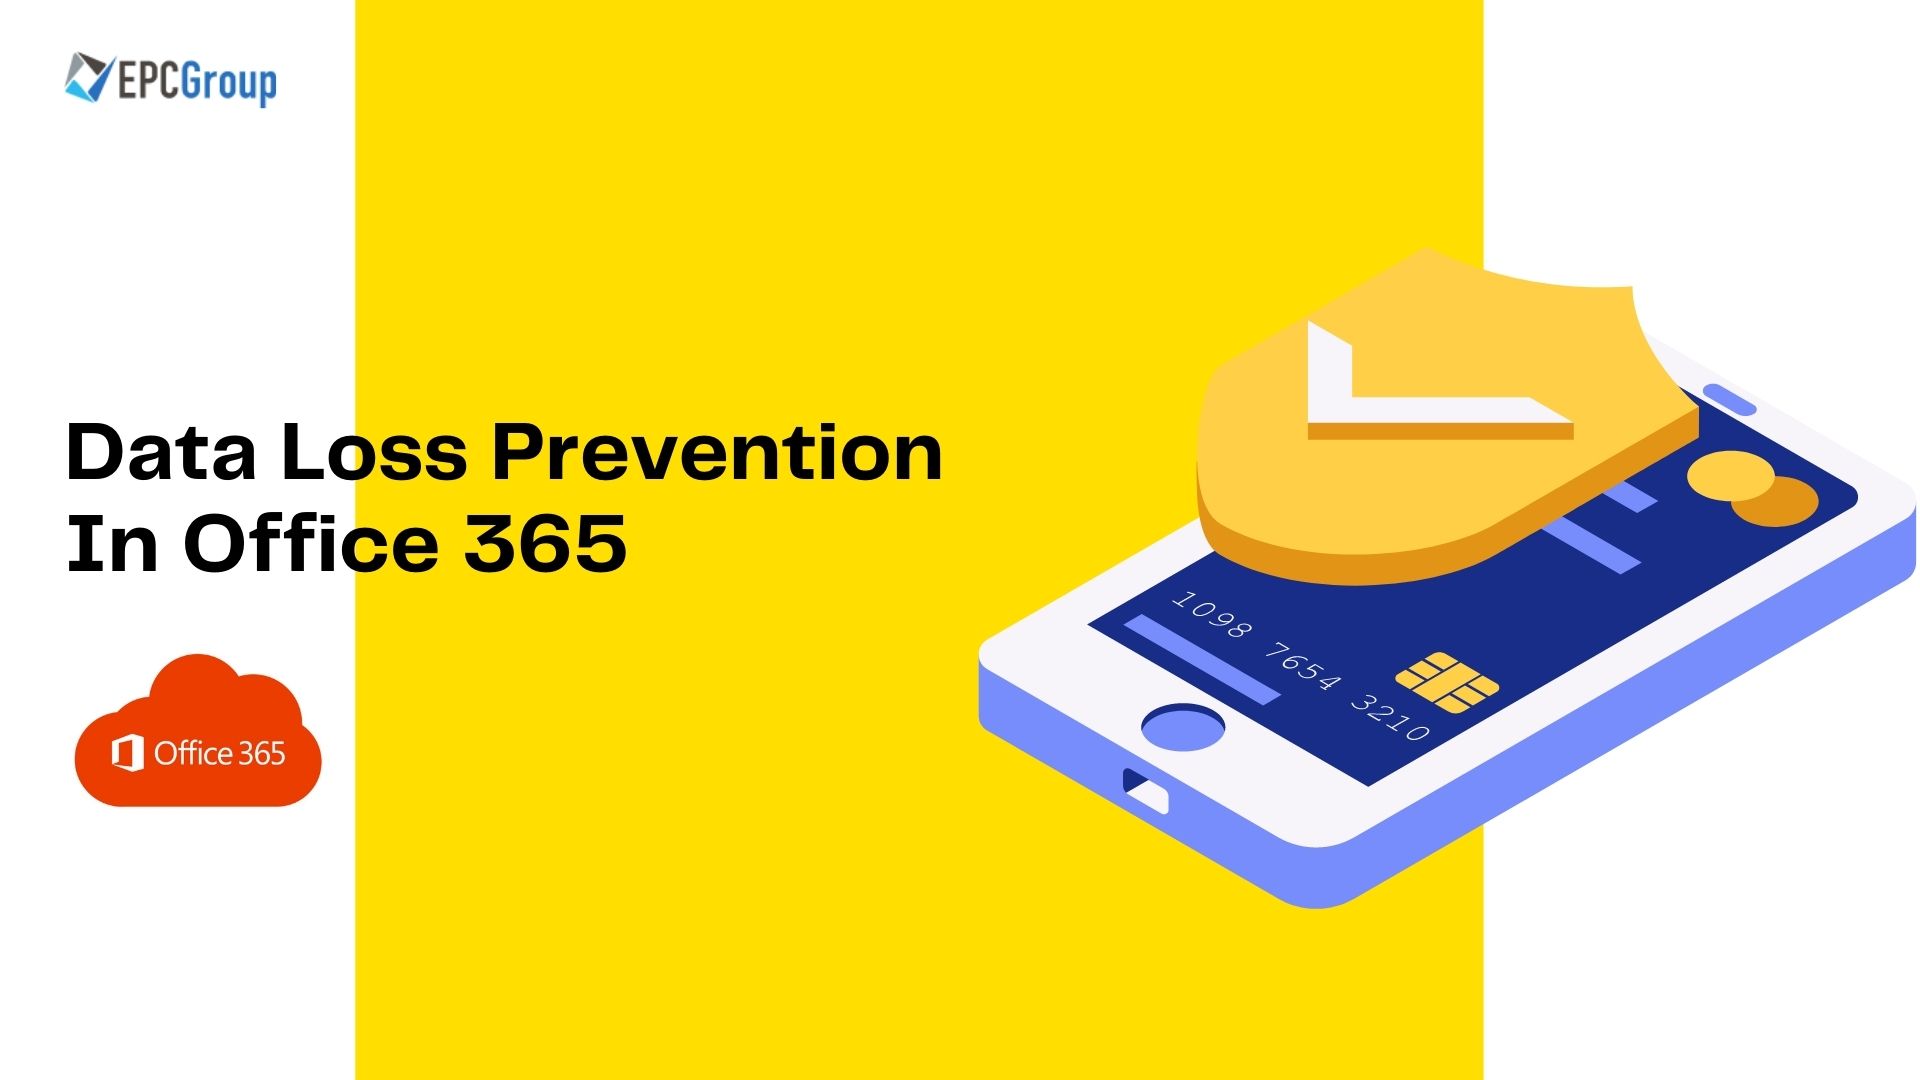 What Is Data Loss Prevention In Office 365